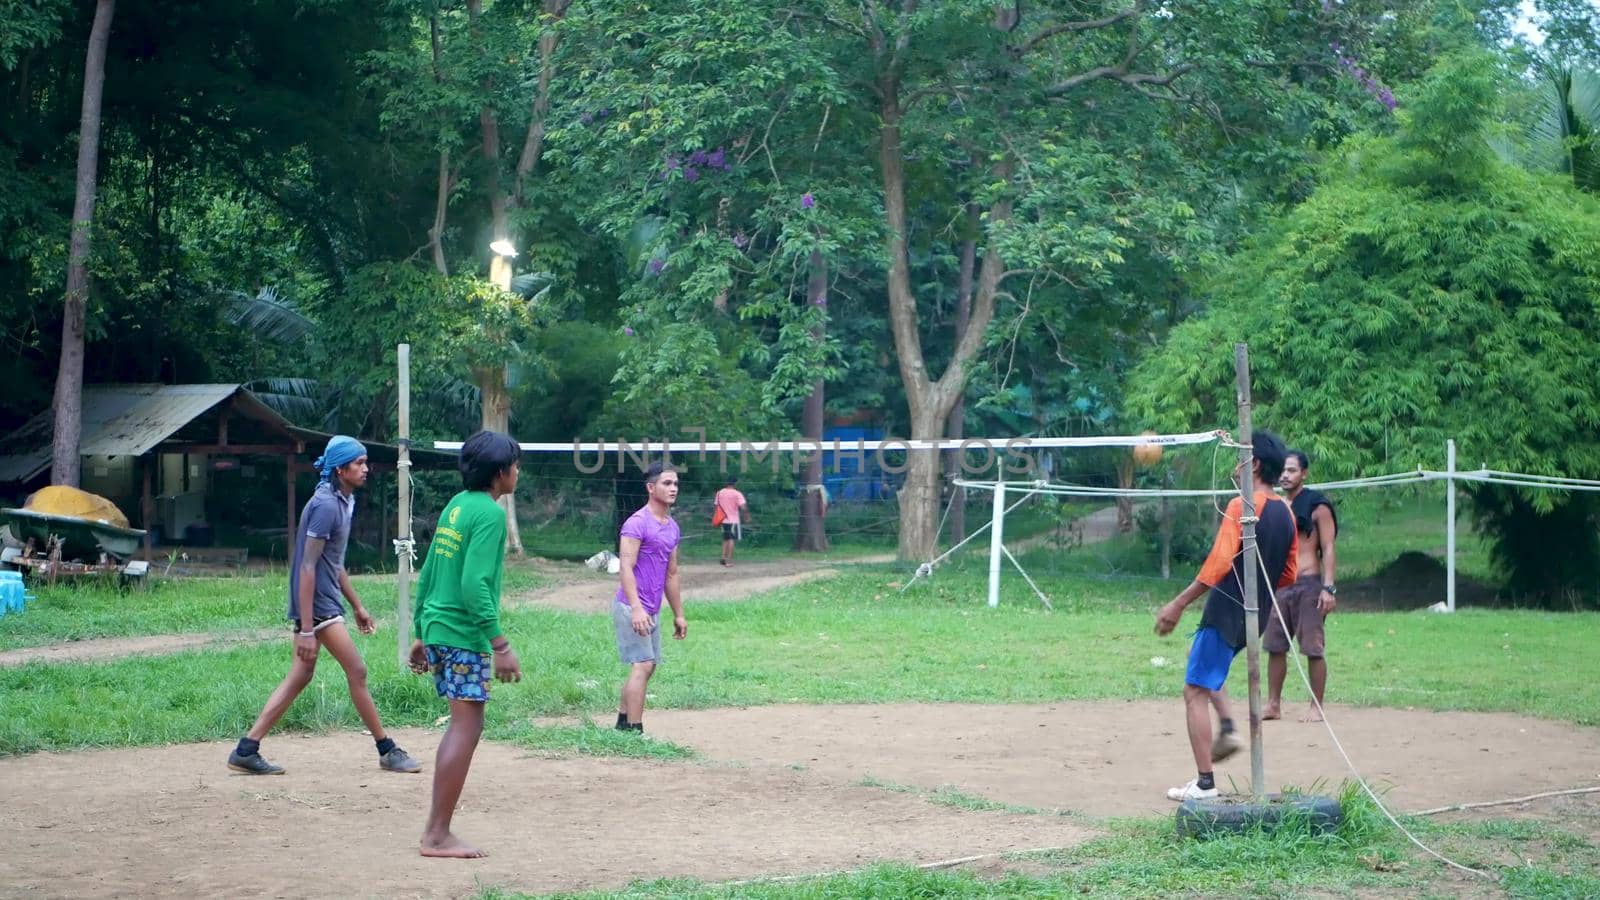 ANG THONG, THAILAND - 9 JUNE 2019: Thai teenagers playing sepak takraw in park. Group of men playing kick volleyball against green trees in yard in local settlement. Traditional national sport game.